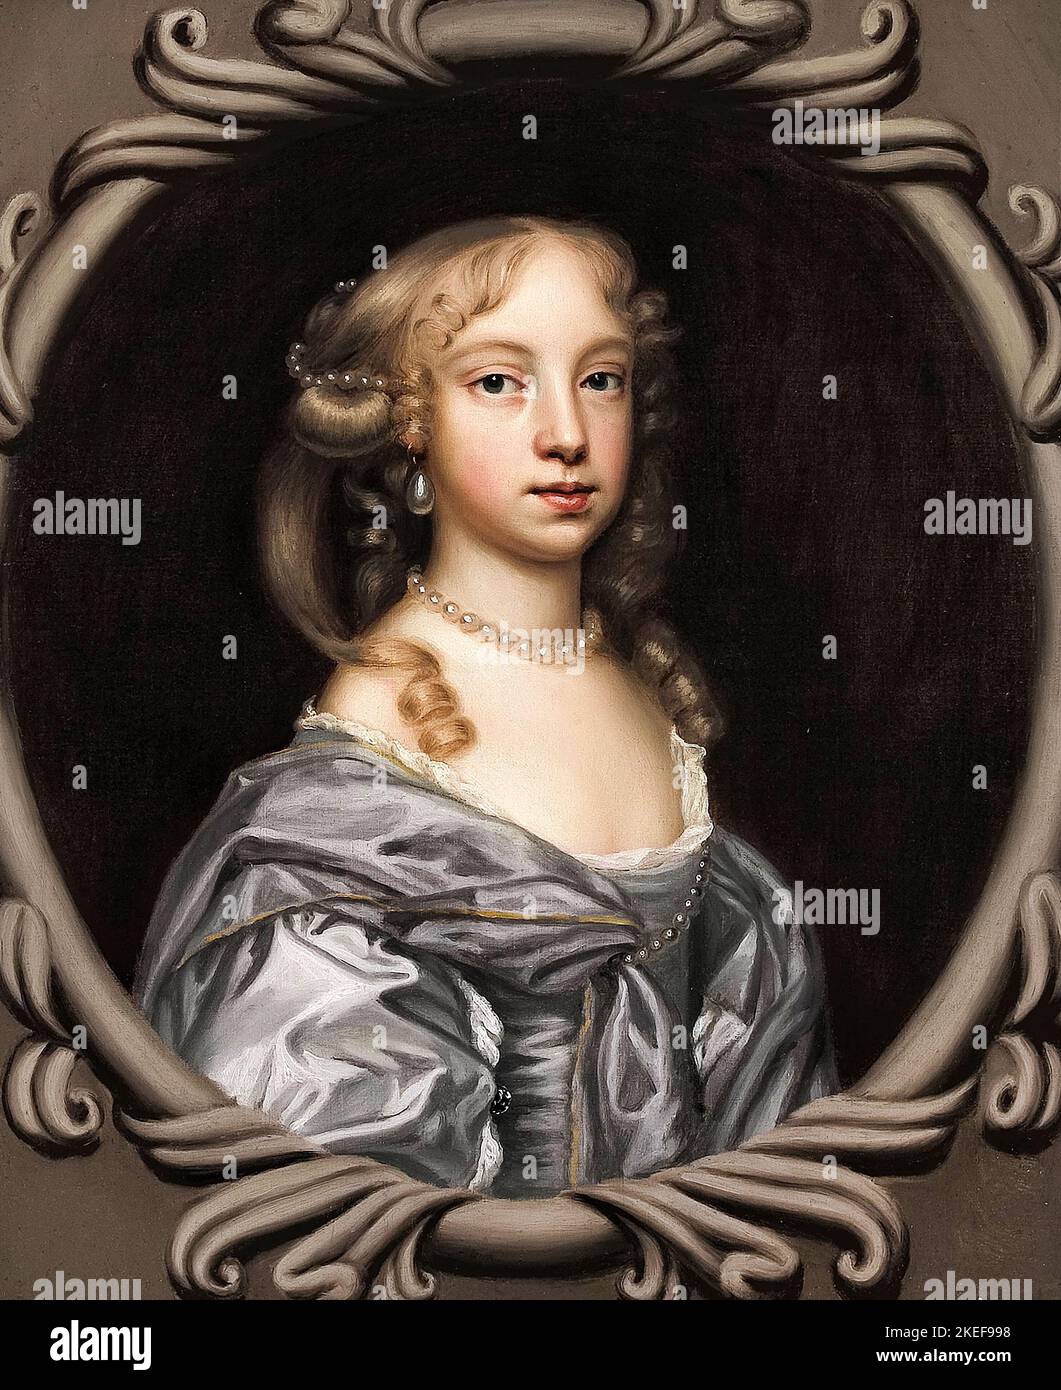 Mary Beale, Mary Wither of Andwell, Circa 1670, Oil on canvas, Art Gallery of South Australia Stock Photo